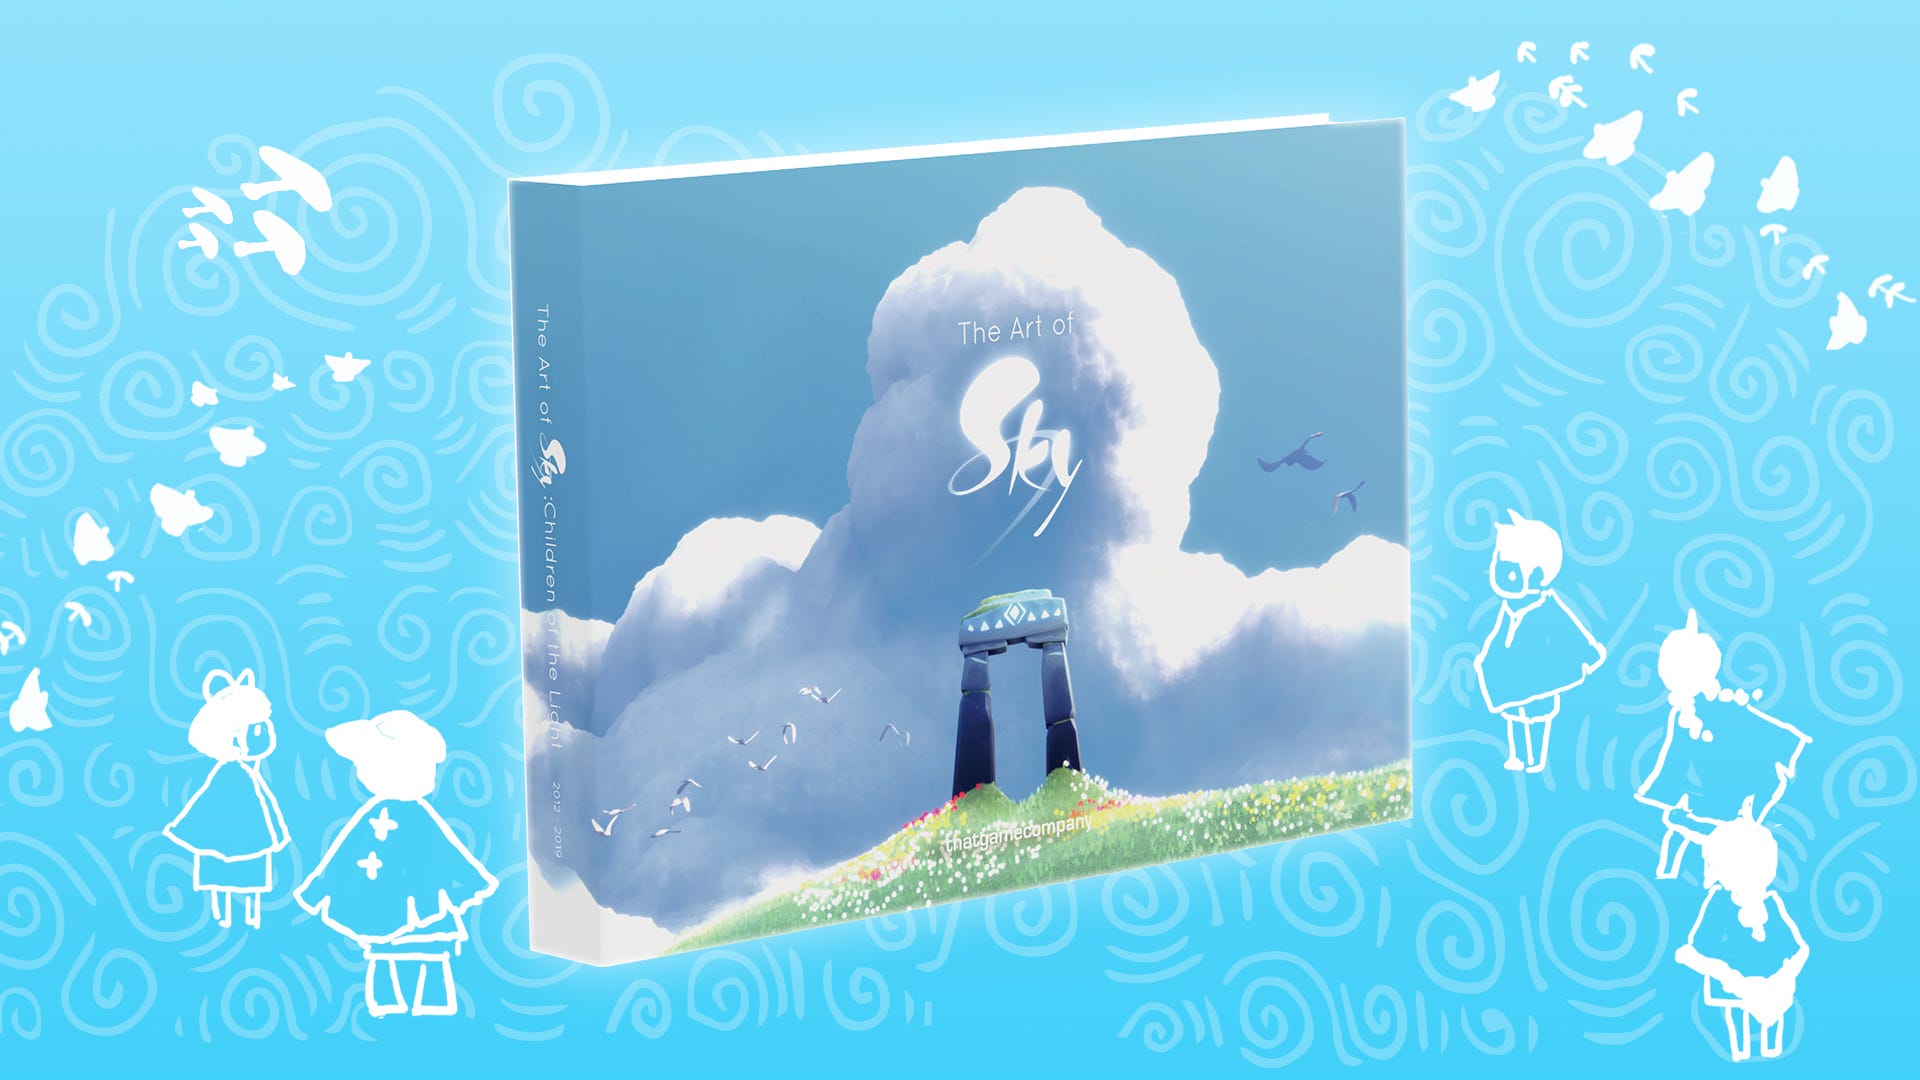 ThatGameCompany's new Sky: The Children of the Light art book unlocks a special in-game cutscene